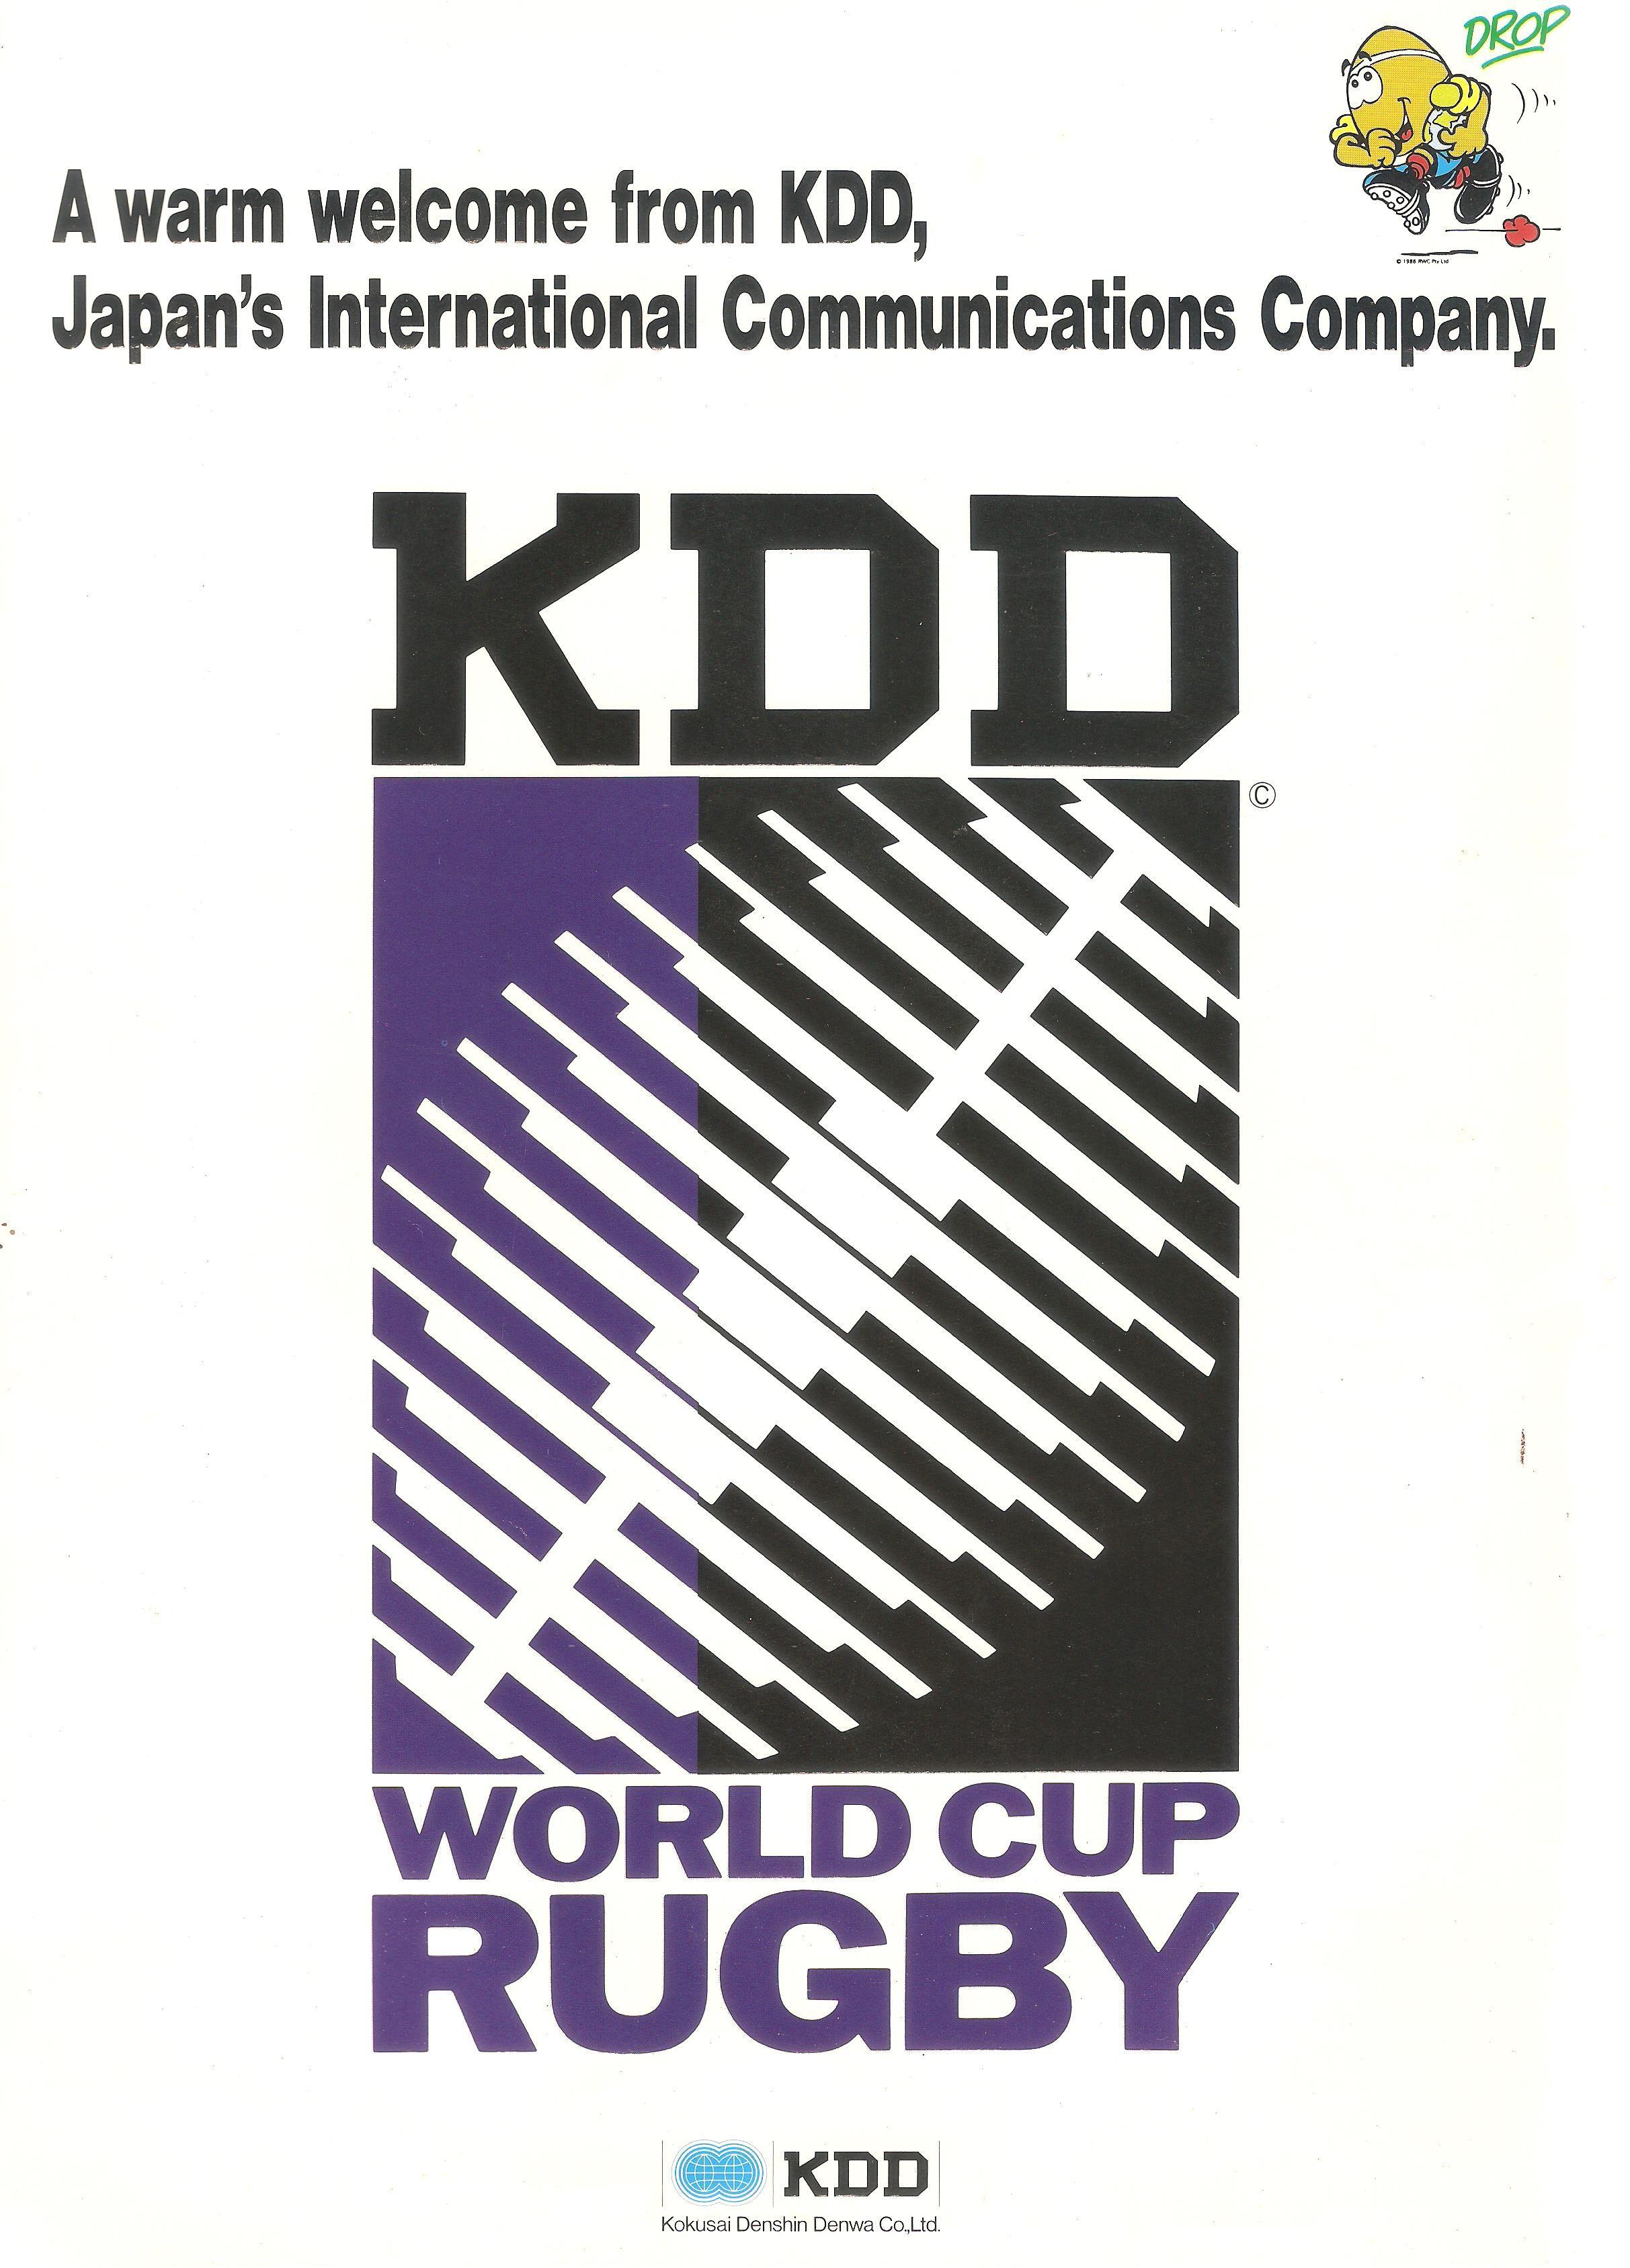 KDD Logo - TDIH: May 22 1987 – The first Rugby World Cup begins. – New Zealand ...